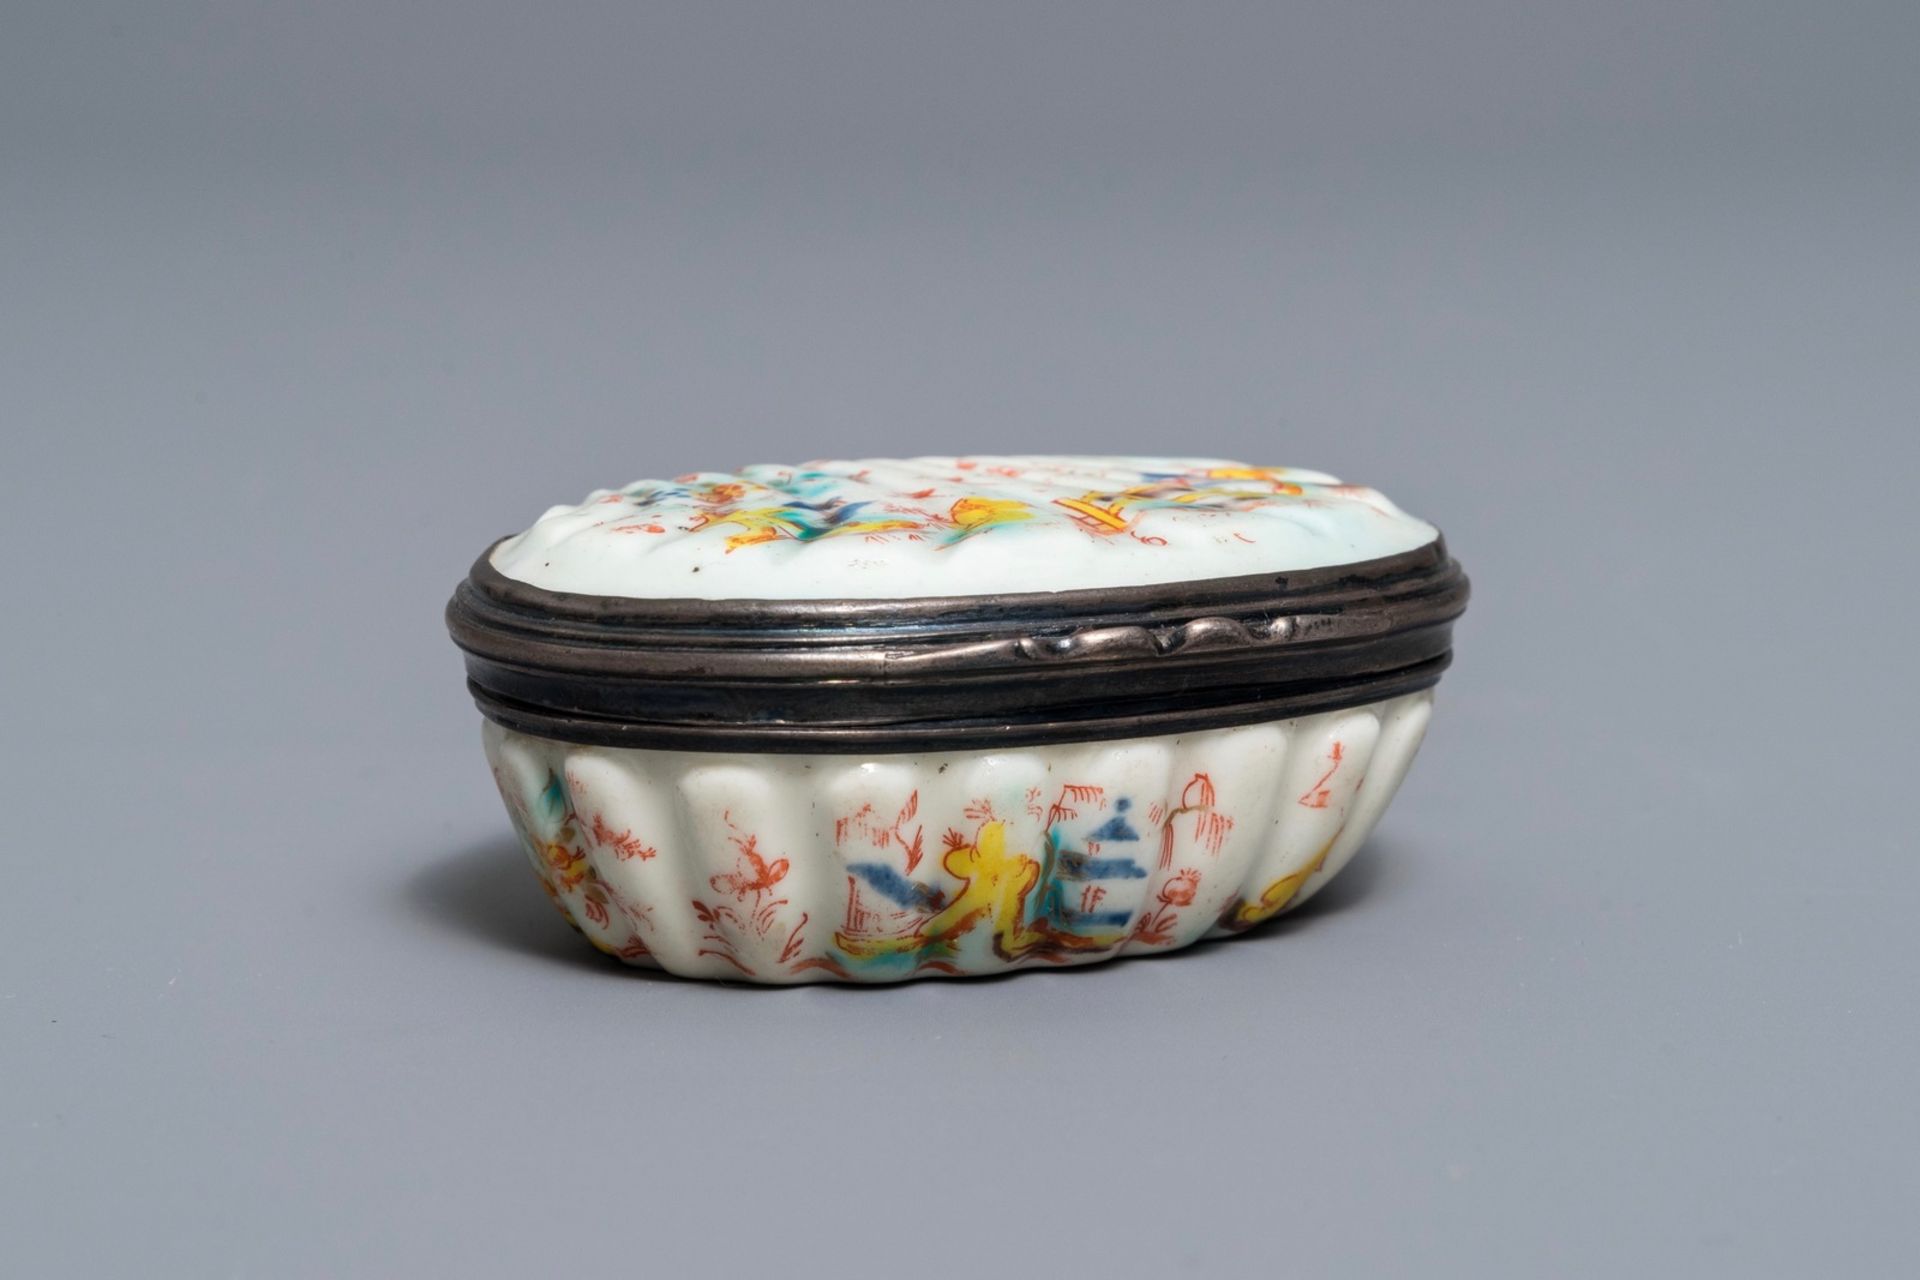 A Kakiemon-style Saint-Cloud porcelain silver-mounted snuff box, France, 2nd quarter 18th C. - Image 2 of 10